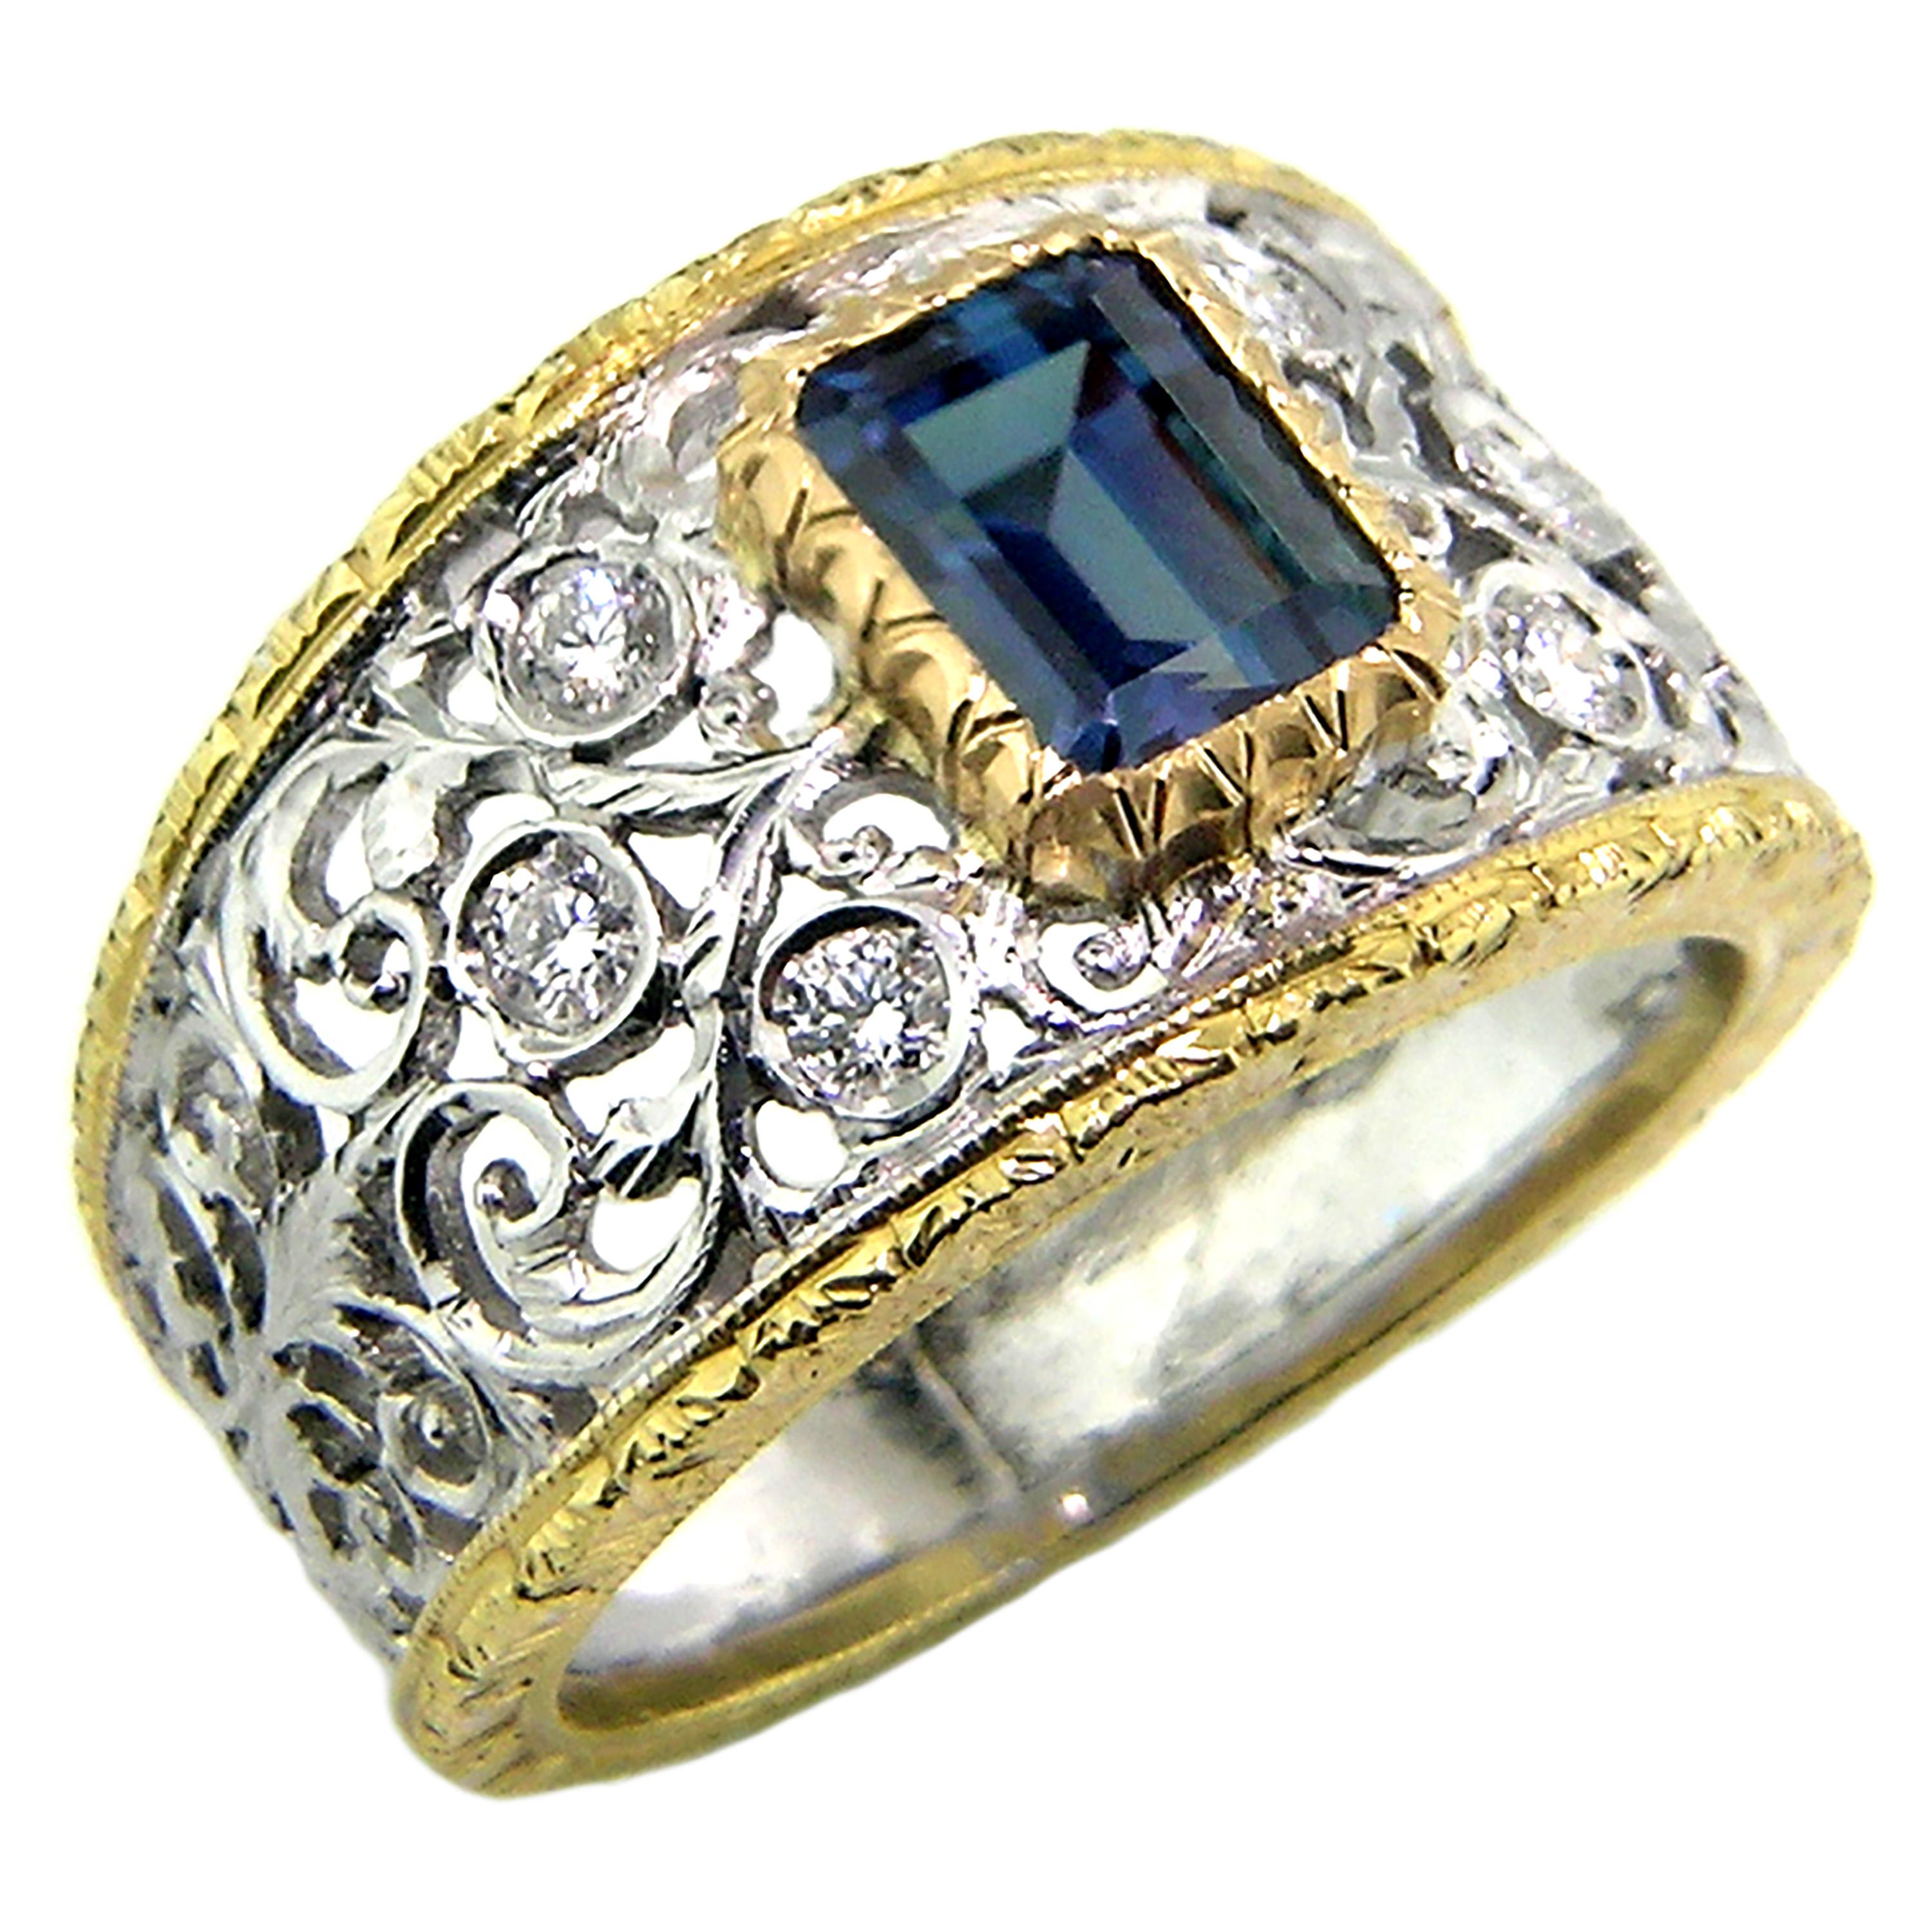 Cynthia Scott 1.25ct Natural Alexandrite, Brazil, and 18kt Ring, Made in Italy